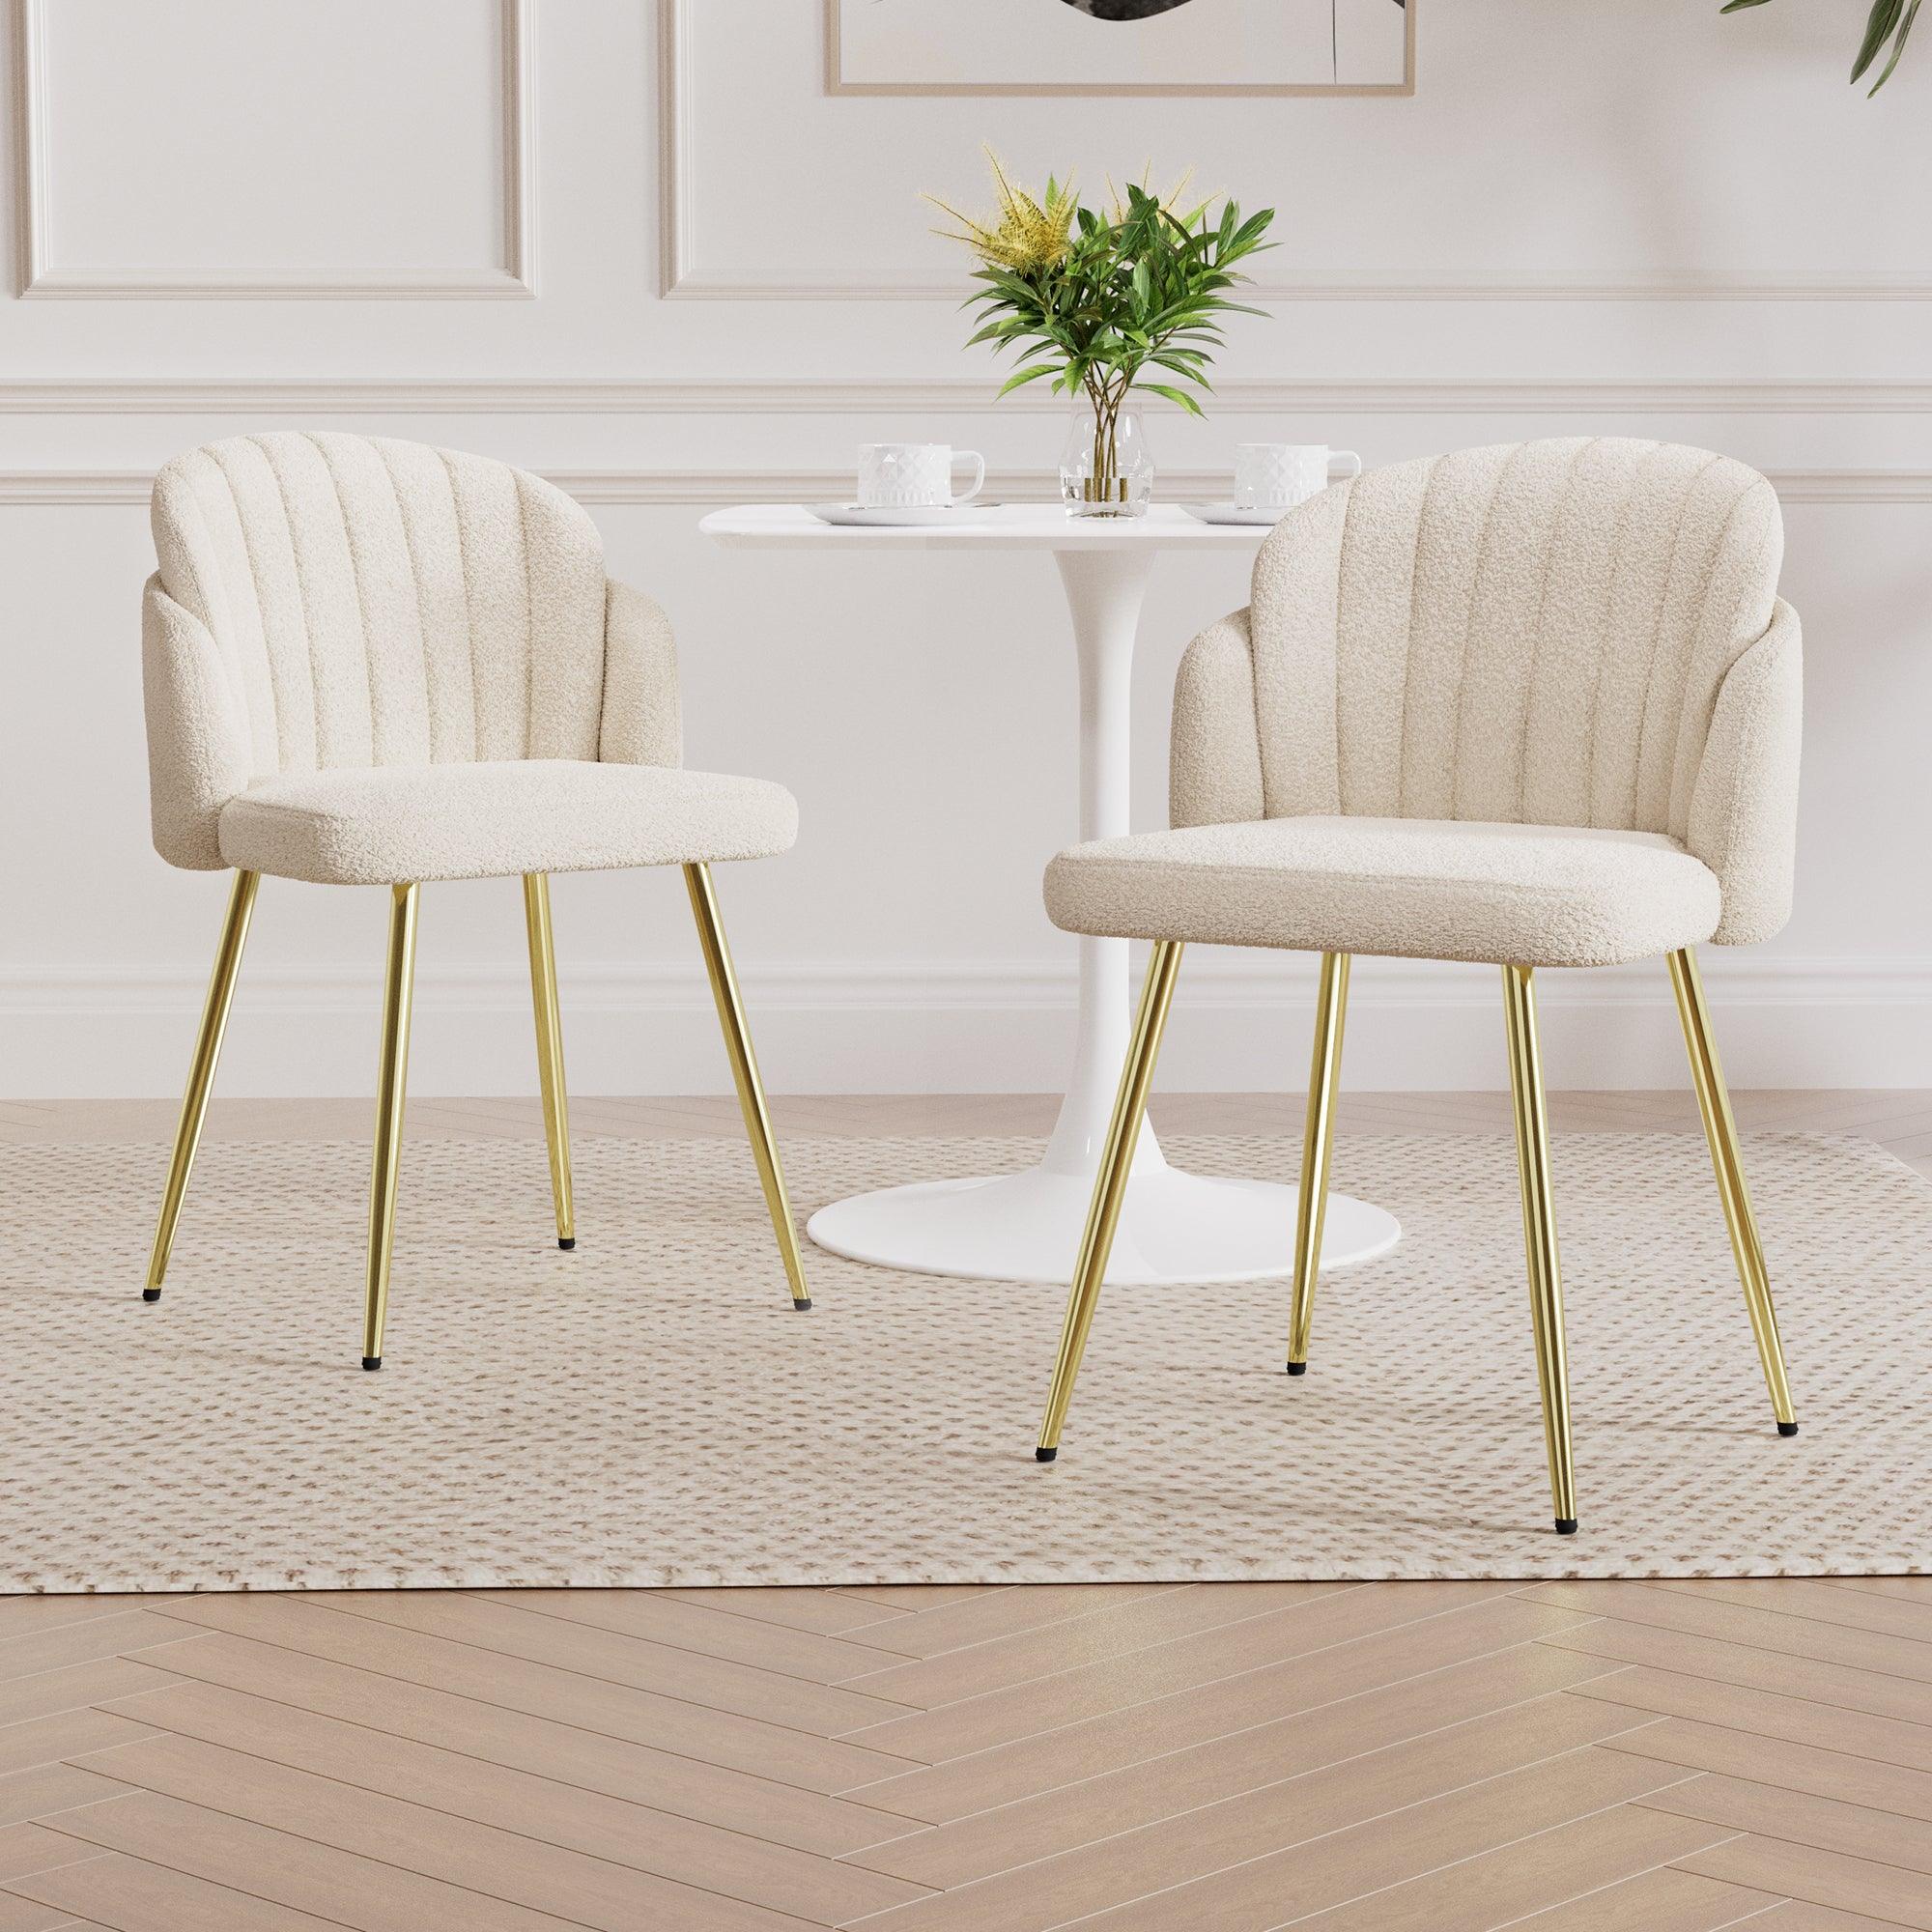 🆓🚛 Modern Simple Teddy Fleece Dining Chair Fabric Upholstered Chairs Home Bedroom Stool Back Dressing Chair Gold Metal Legs (Set Of 2)